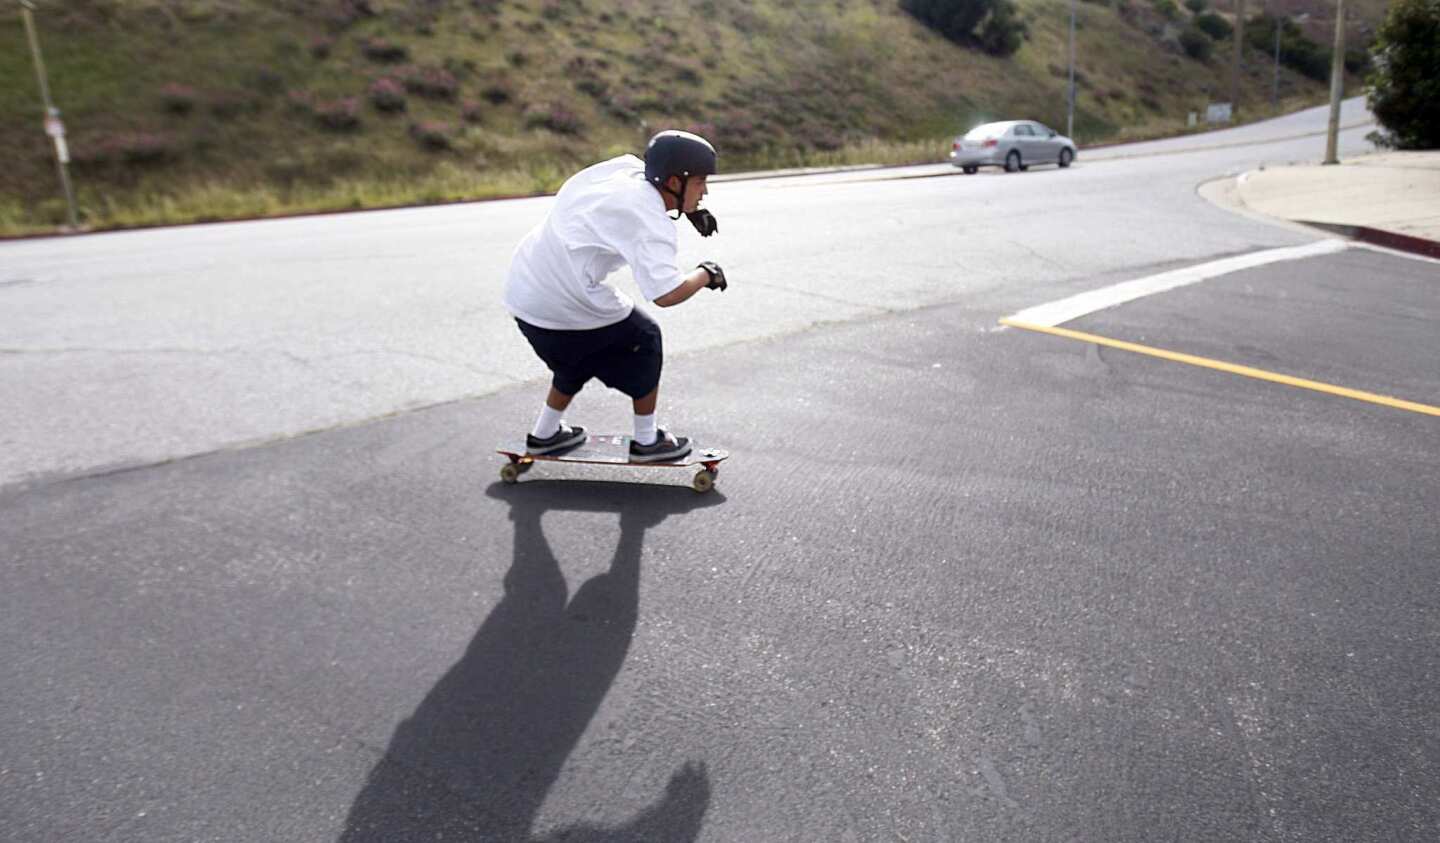 Los Angeles' skateboarding rule would require skaters, like this one on Dodson Avenue in San Pedro, to follow a 25-mph speed limit and obey all traffic rules.